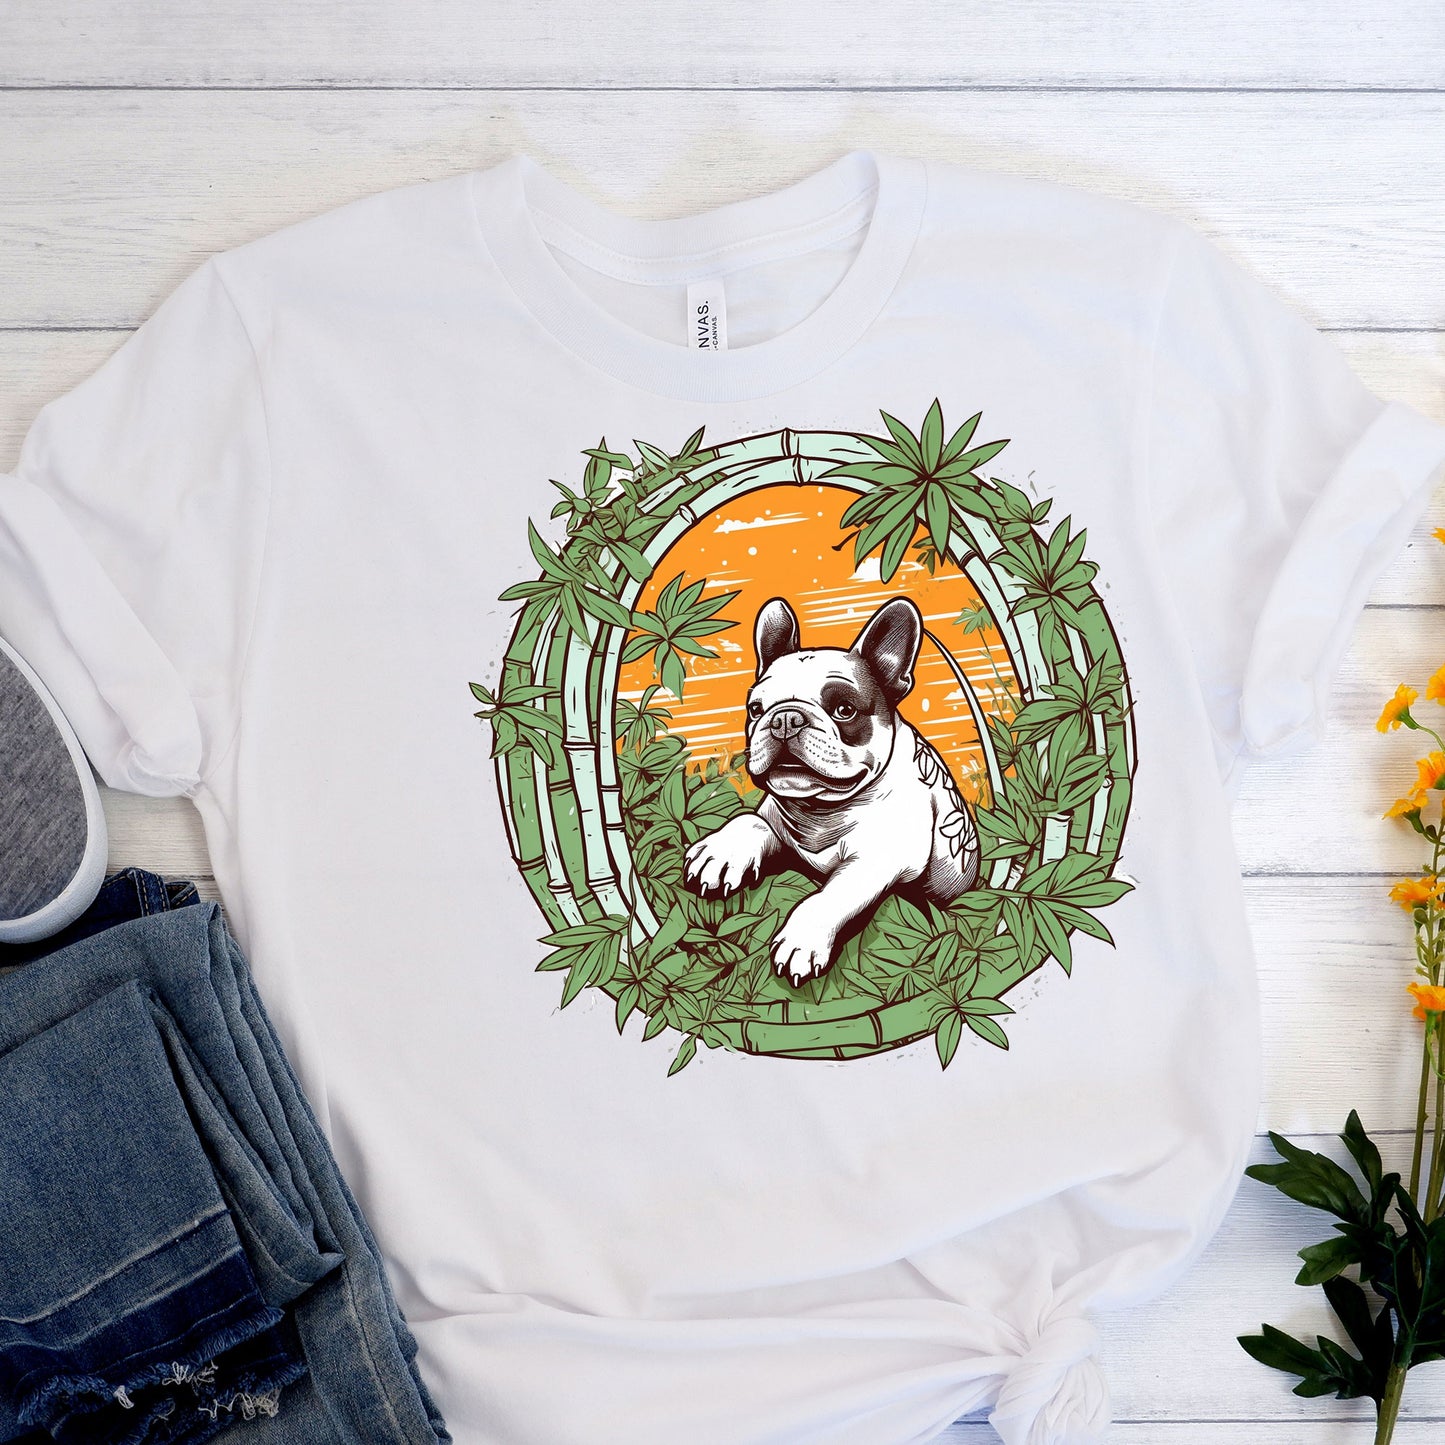 Panda Frenchie T-Shirt - Embracing Endangered Cuteness with Canine Chic